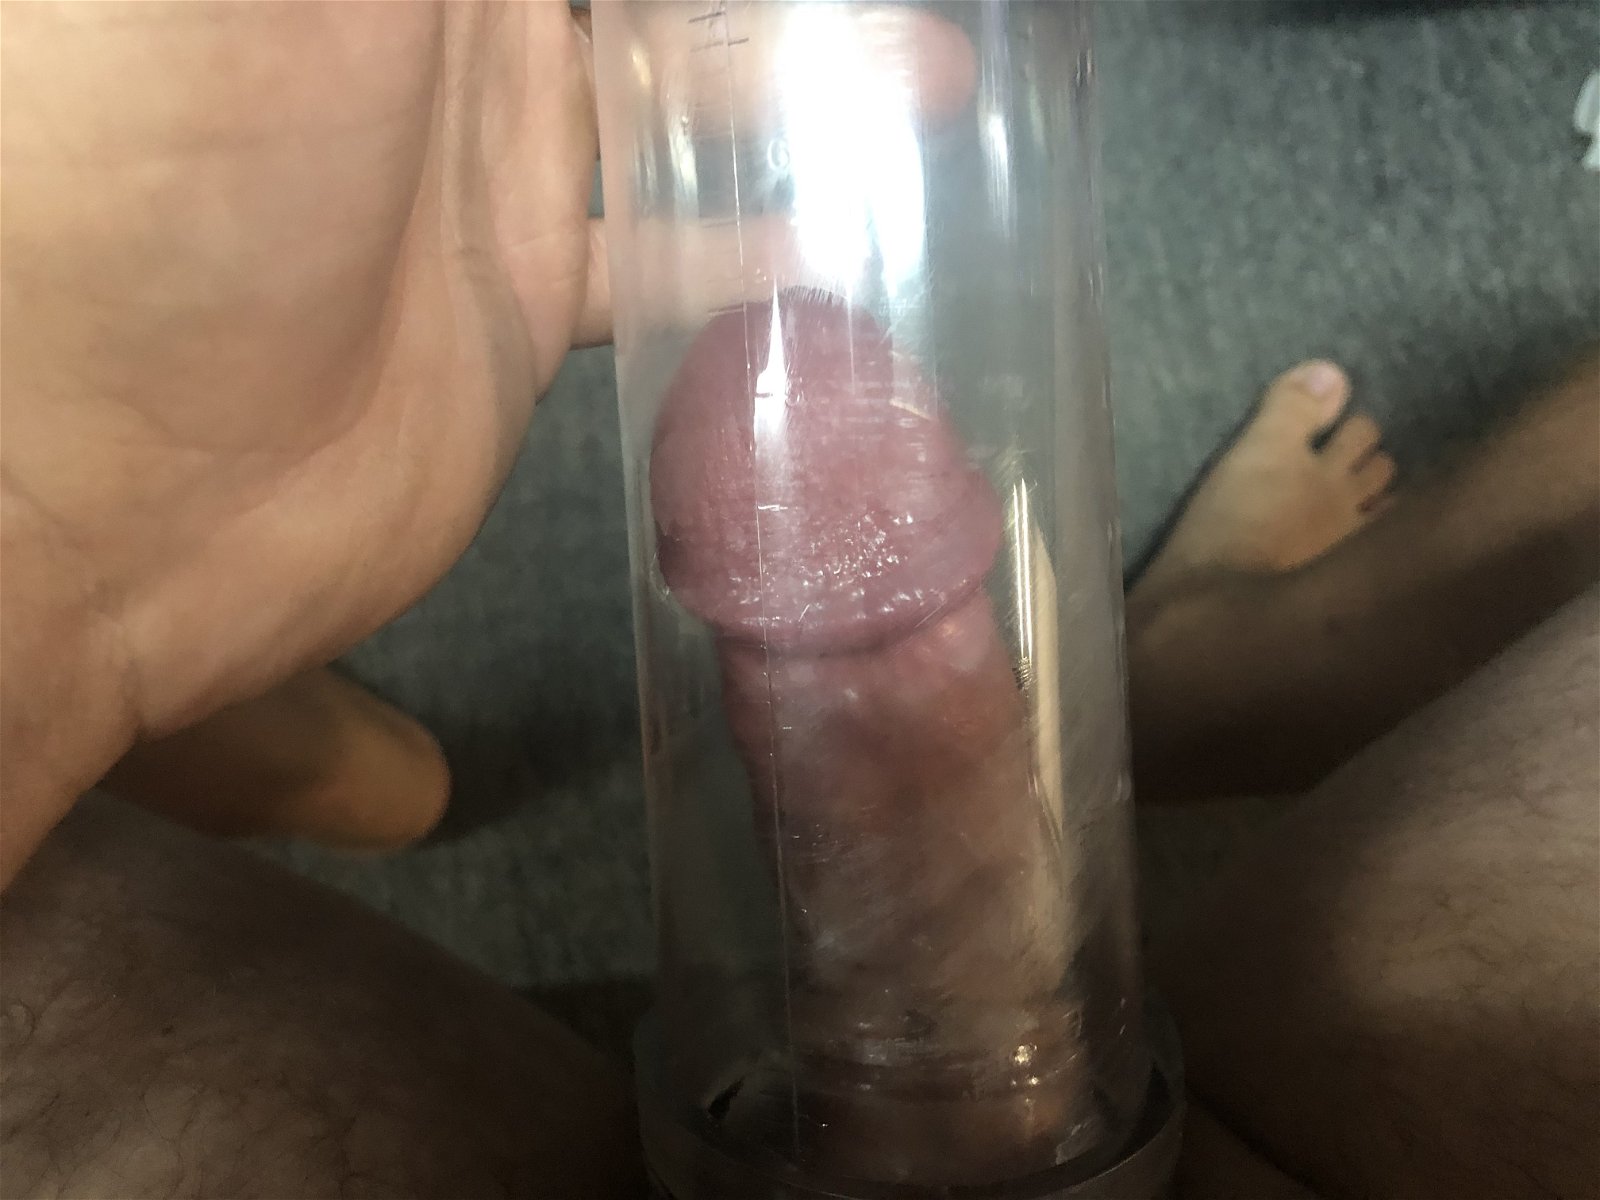 Photo by mancavepumper with the username @mancavepumper,  September 8, 2020 at 4:55 AM. The post is about the topic Penis Pumping and the text says 'Just some penis pumping 

#penispump #cockpump #harddick #penis #cock #pumpeddick'